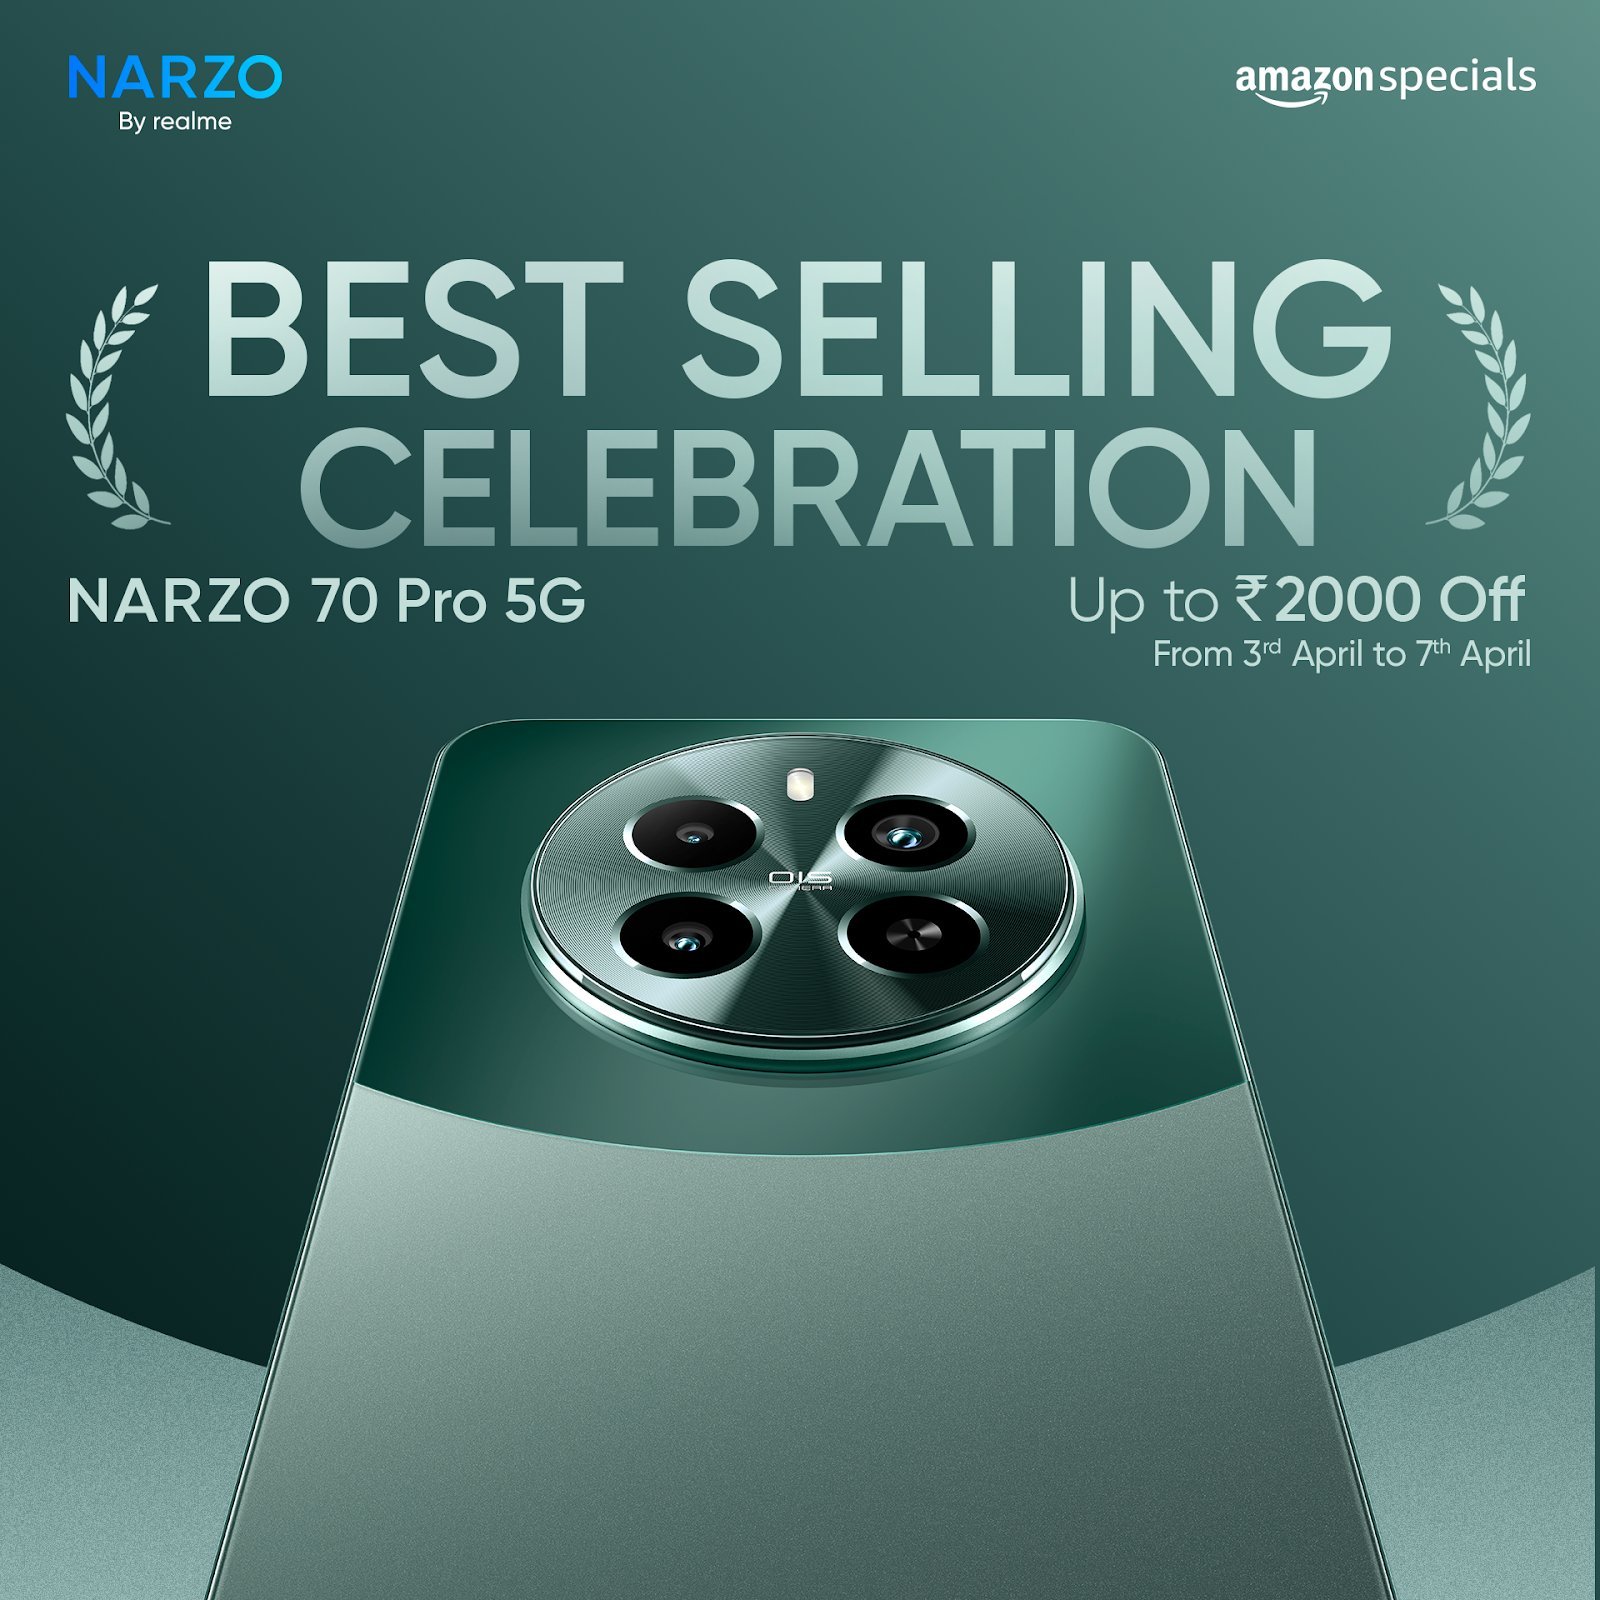 realme announces ‘Best-Selling Celebration’ offers on the latest realme NARZO smartphones starting from 3rd April on realme.com and Amazon.in